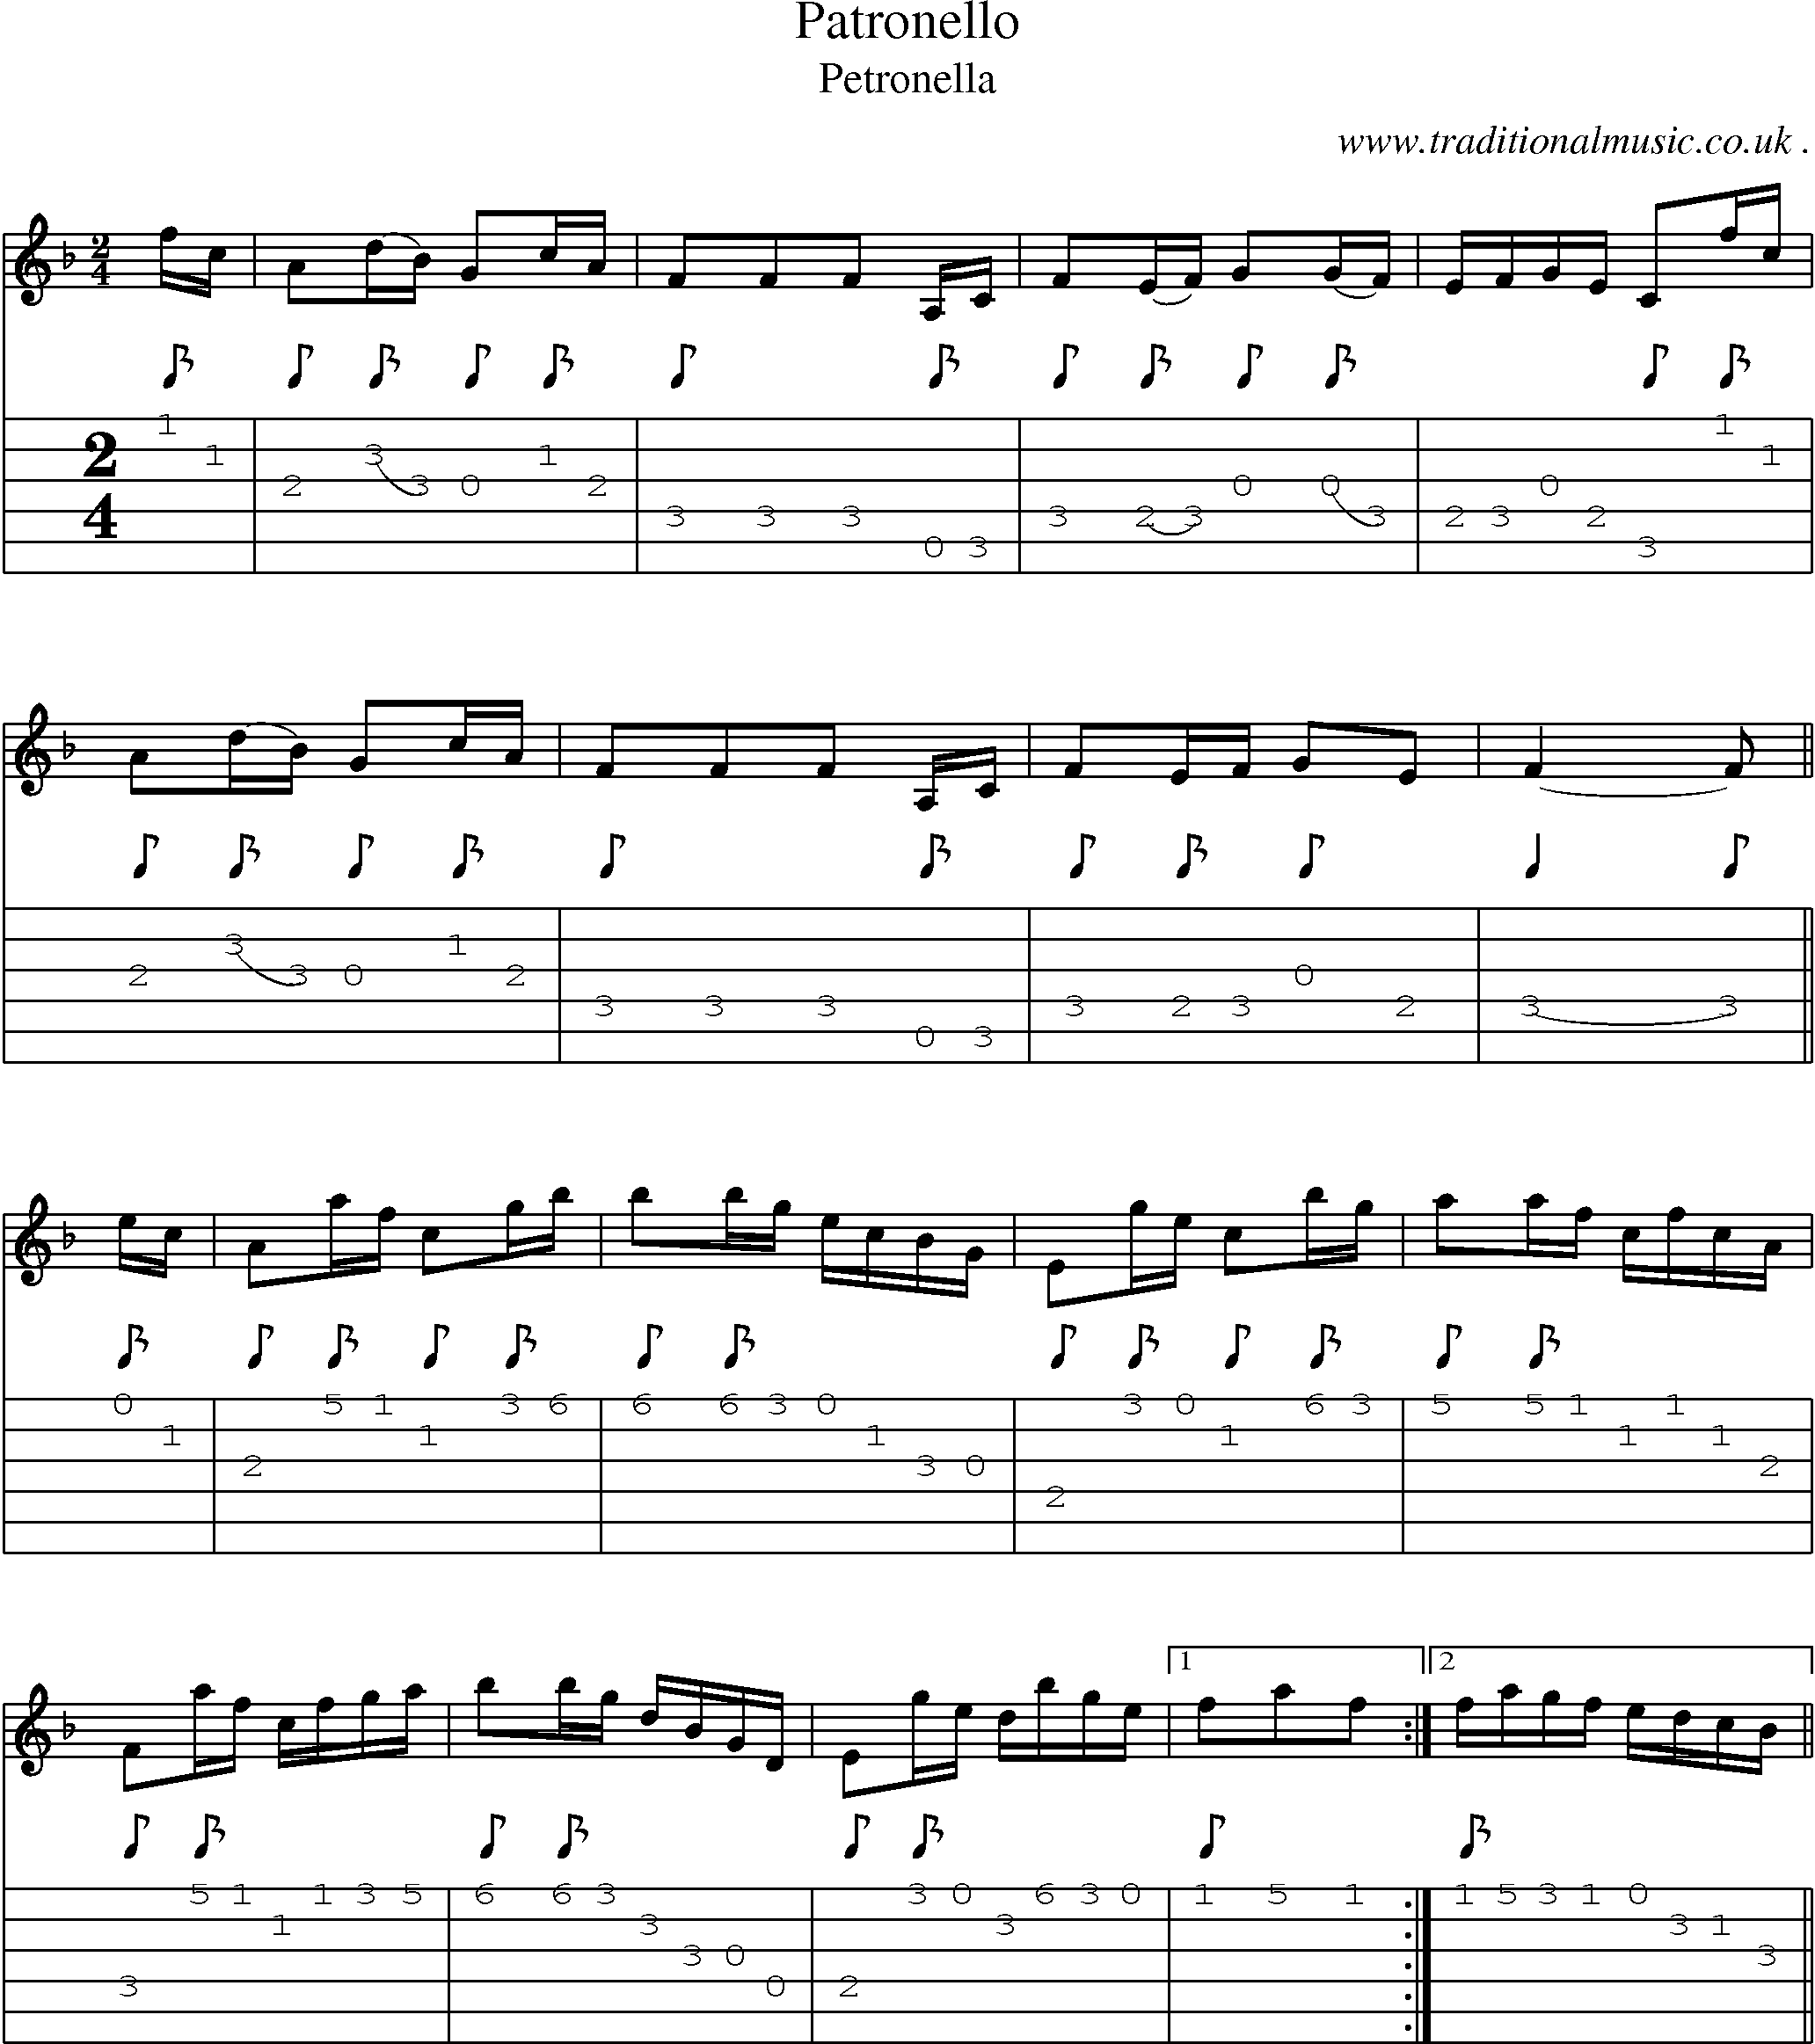 Sheet-Music and Guitar Tabs for Patronello